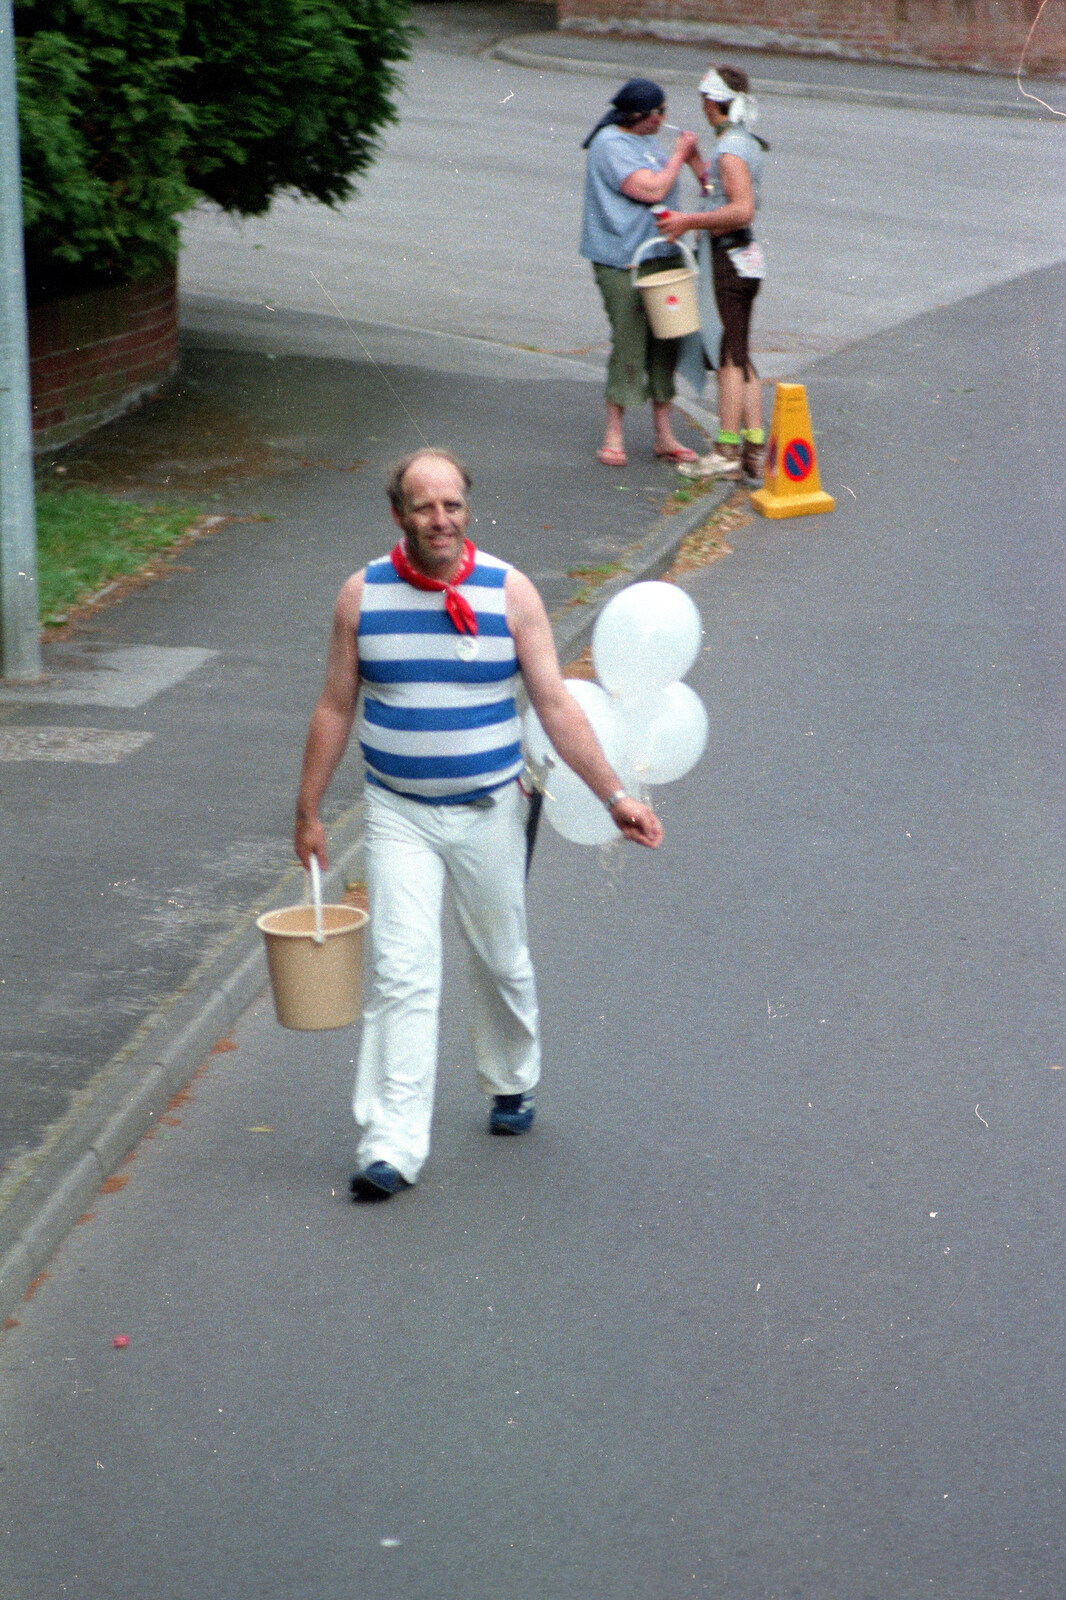 McStone pirate and balloons from The Lymington Carnival, Hampshire - 17th June 1985